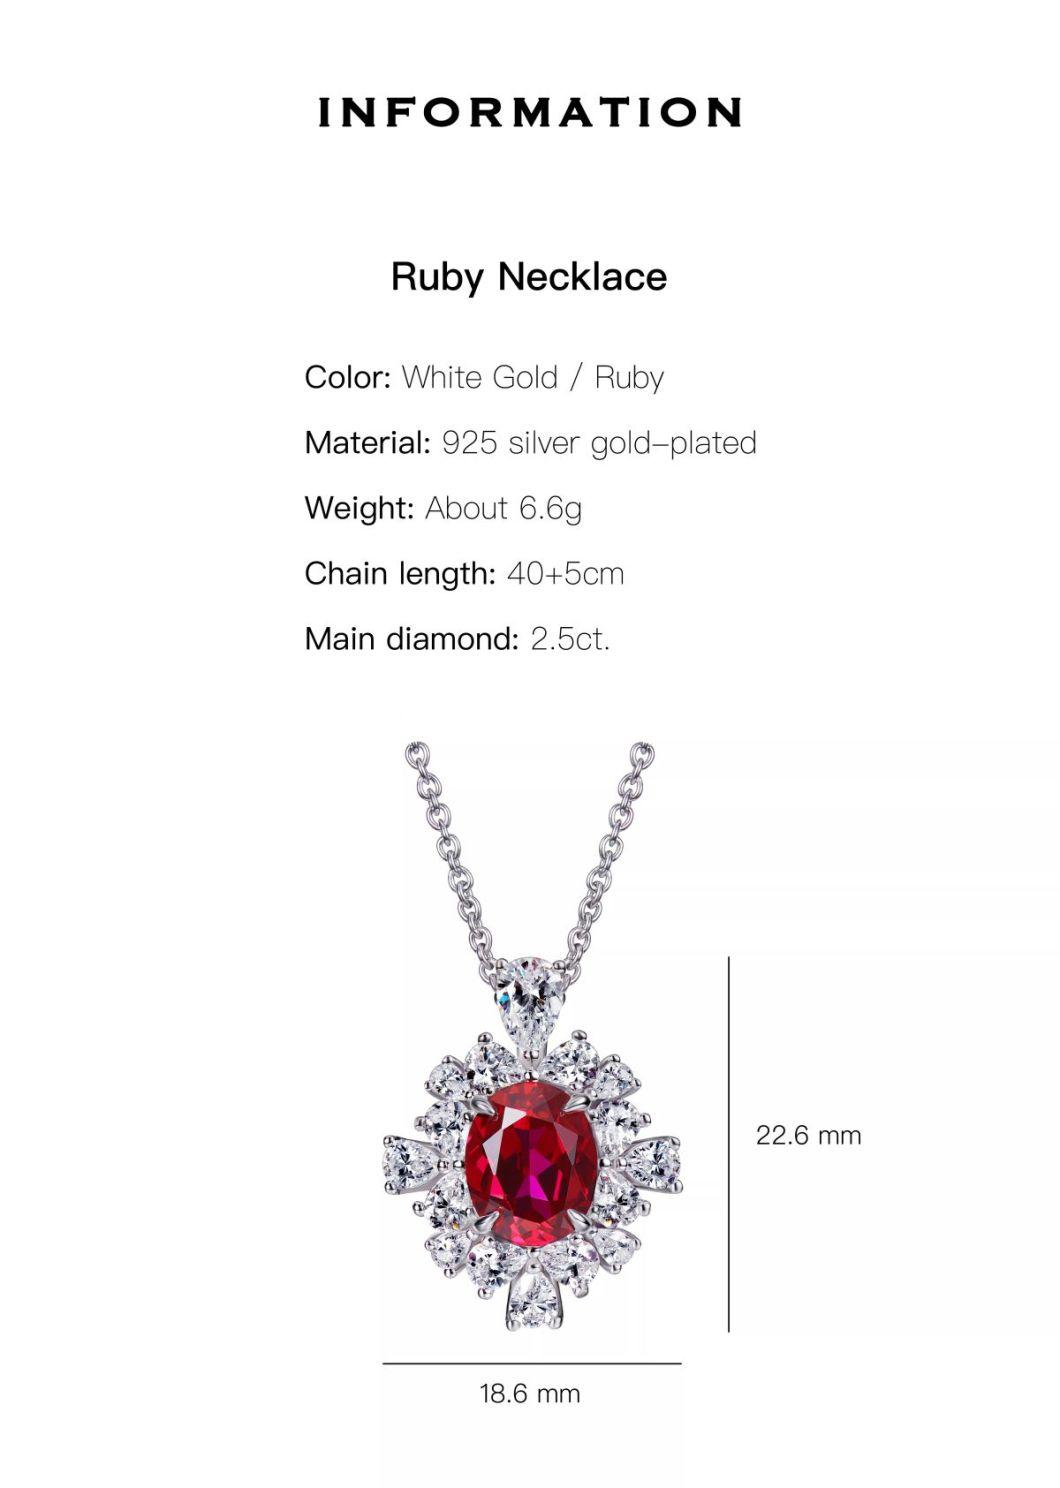 Costume Jewelry Ruby Pendant Gold Plated Jewelry 18K Gold Plated Solid Geometric Rhinestone Necklaces Queen Necklace